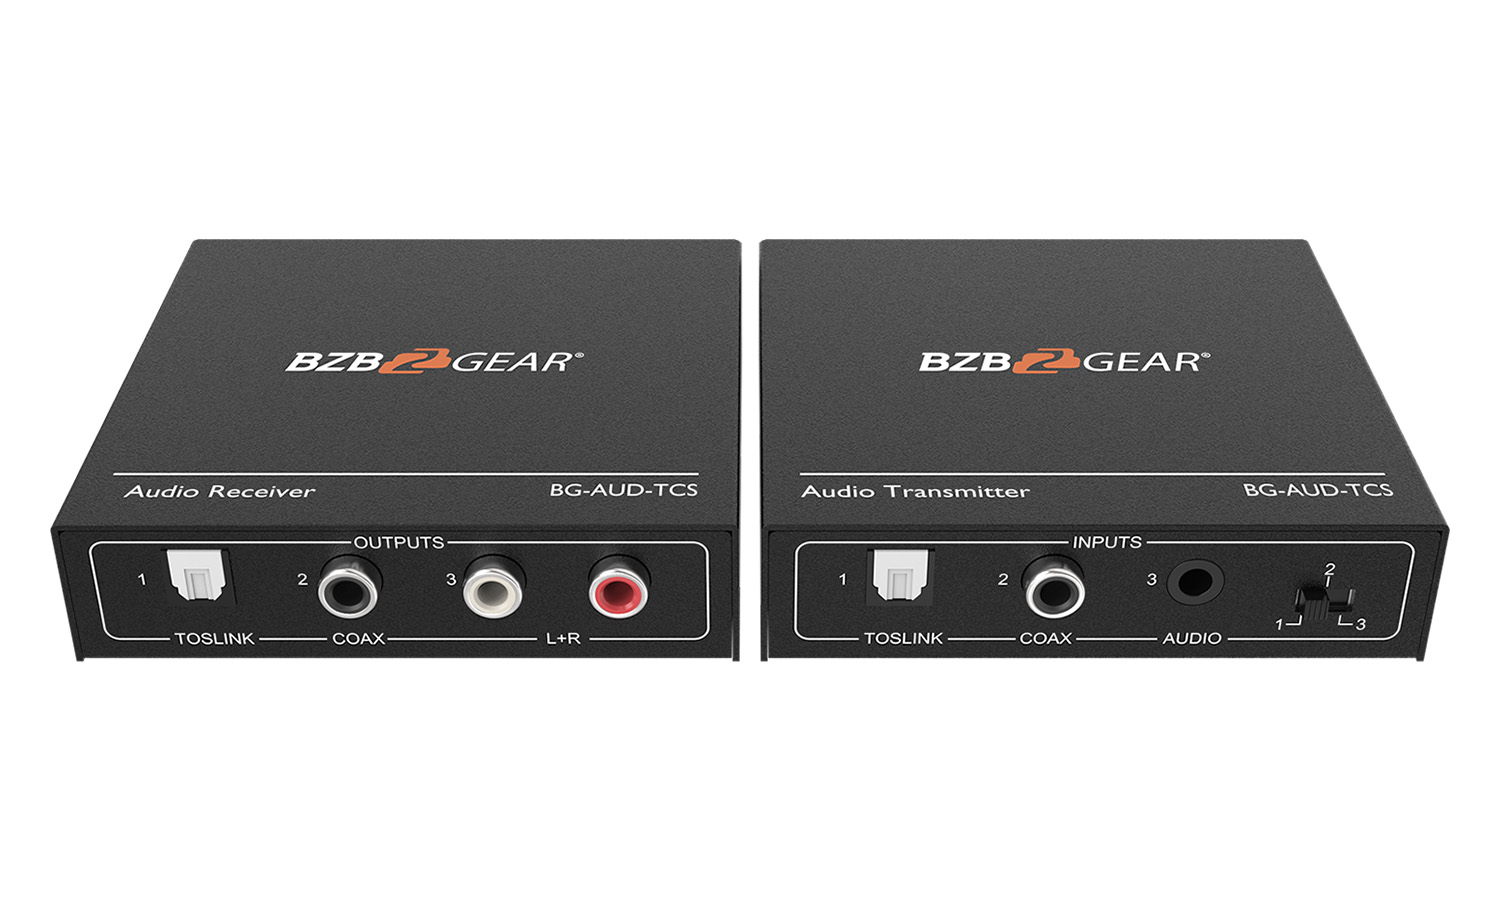 BG-AUD-TCS Long Range Digital/Analog Audio Extender Kit over Cat5e/6/7 up to 950ft (Stereo/TOSLINK/COAX) by BZBGEAR